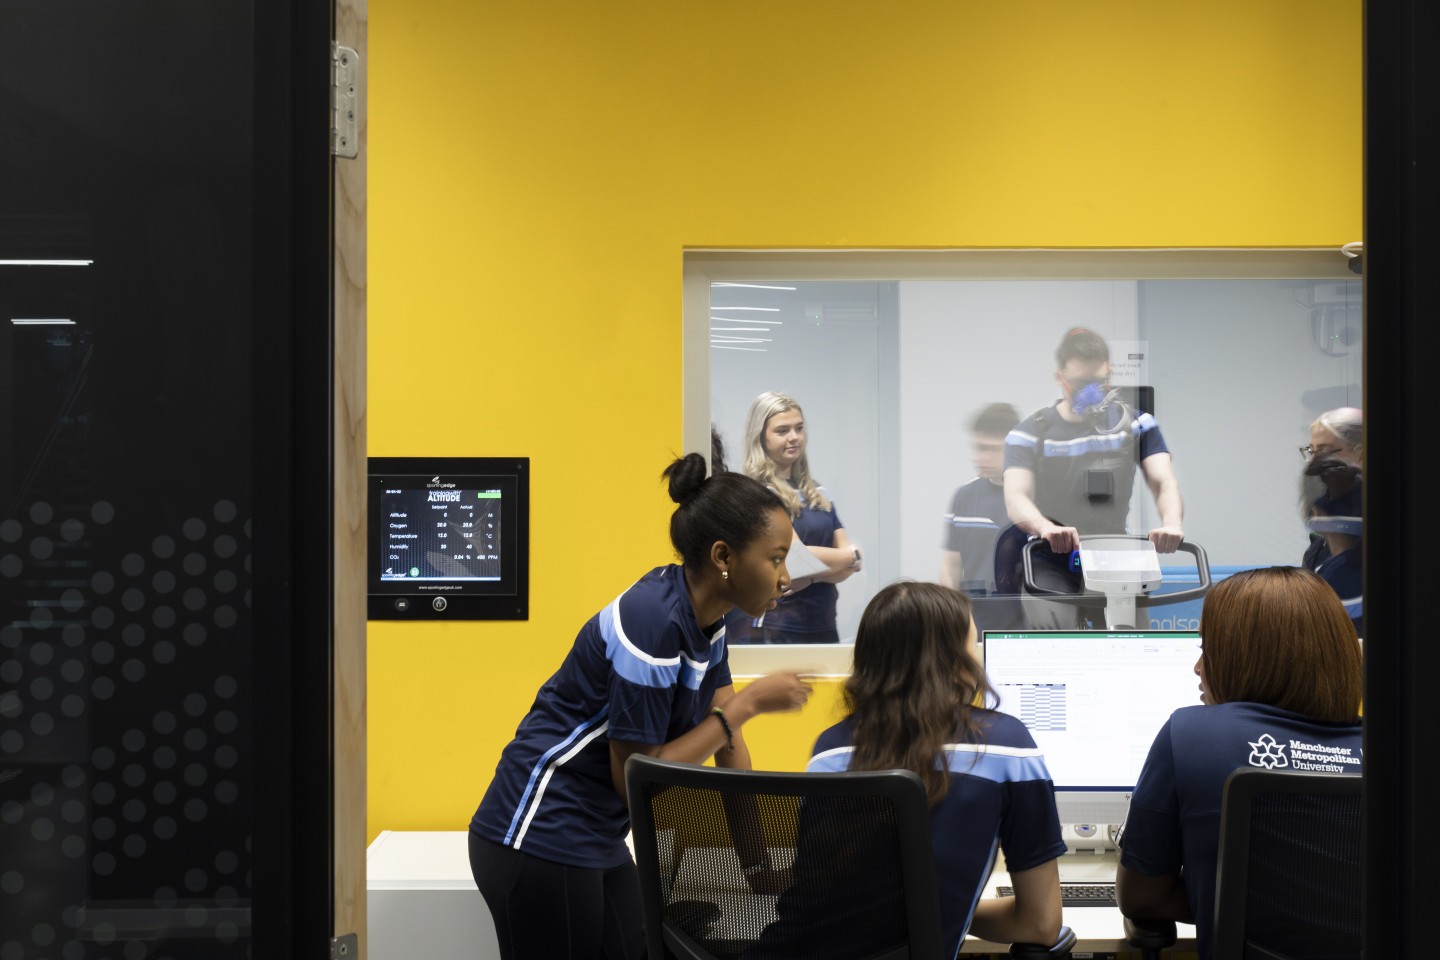 Environment Chamber at the Institute of Sport